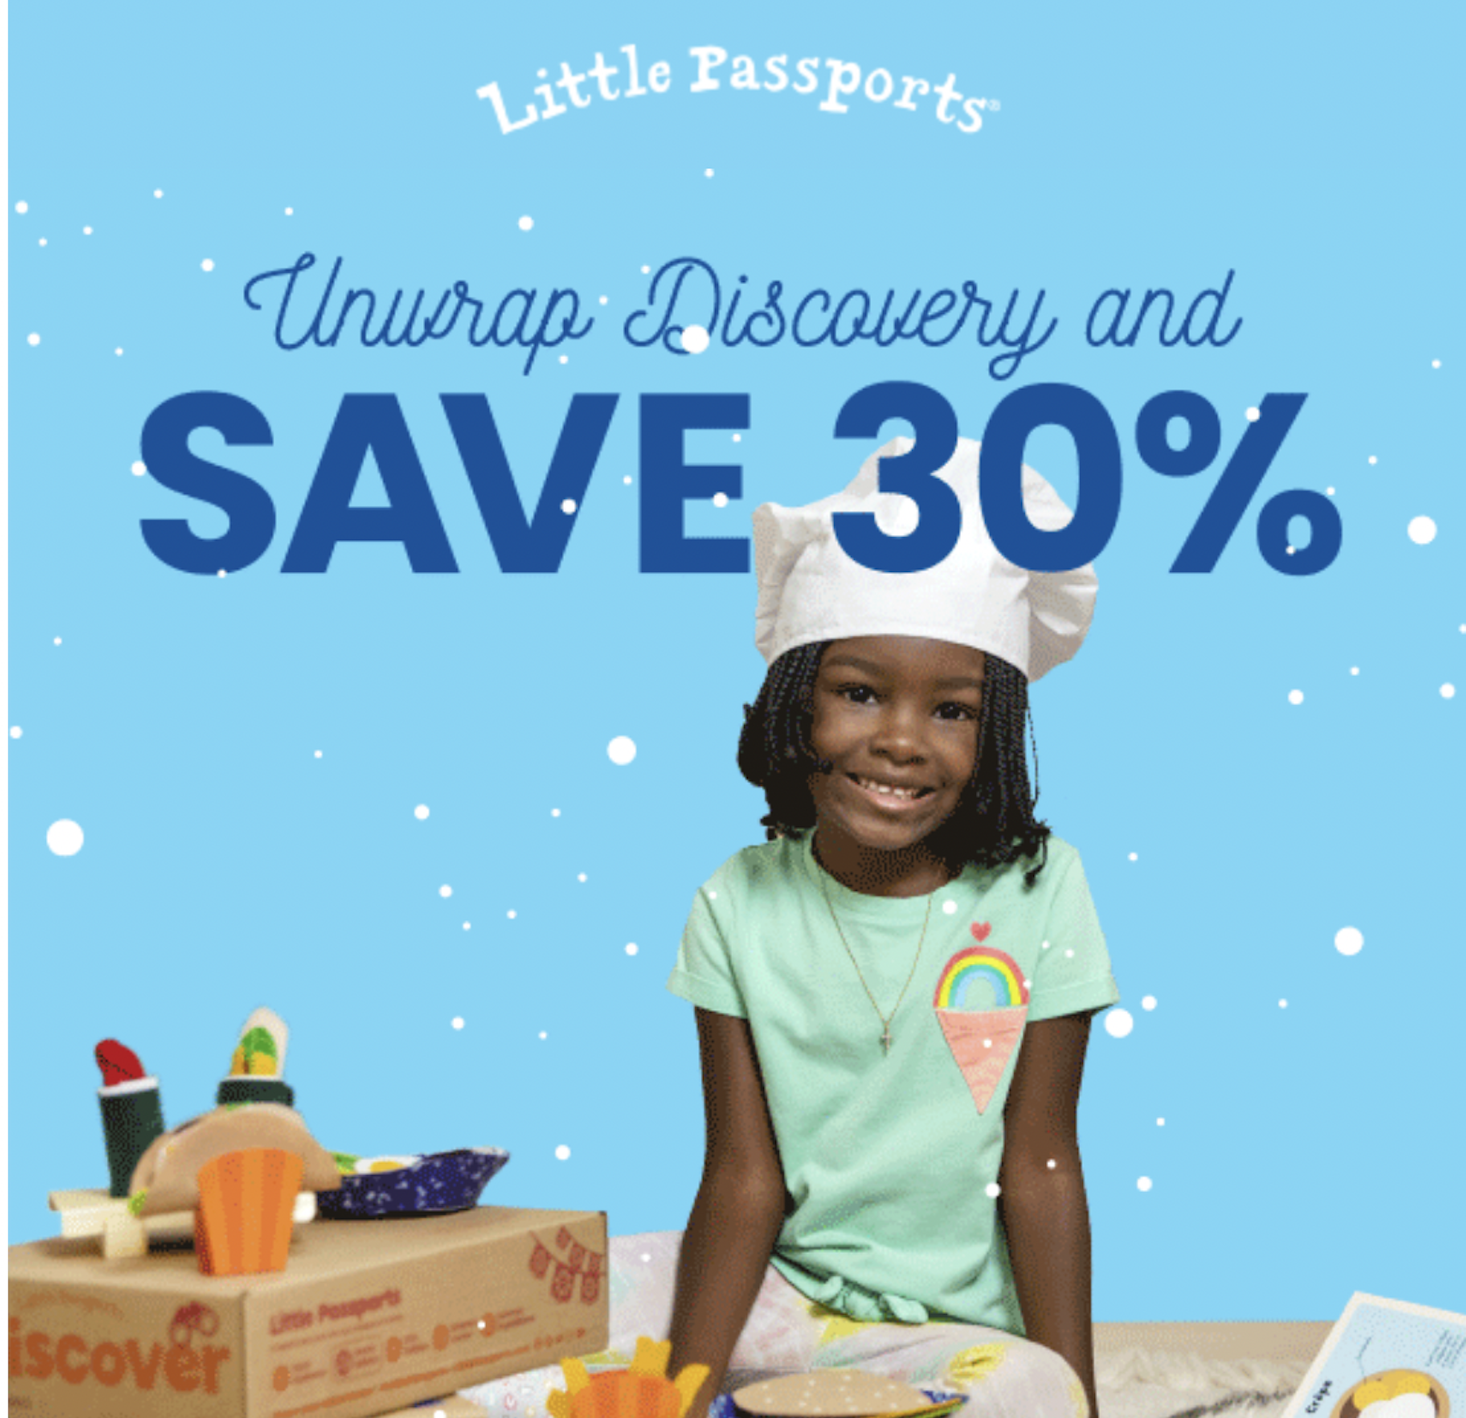 Little Passports Holiday 2021 Deal: 30% OFF New Subscriptions – Science, Geography, Culture, Etc.